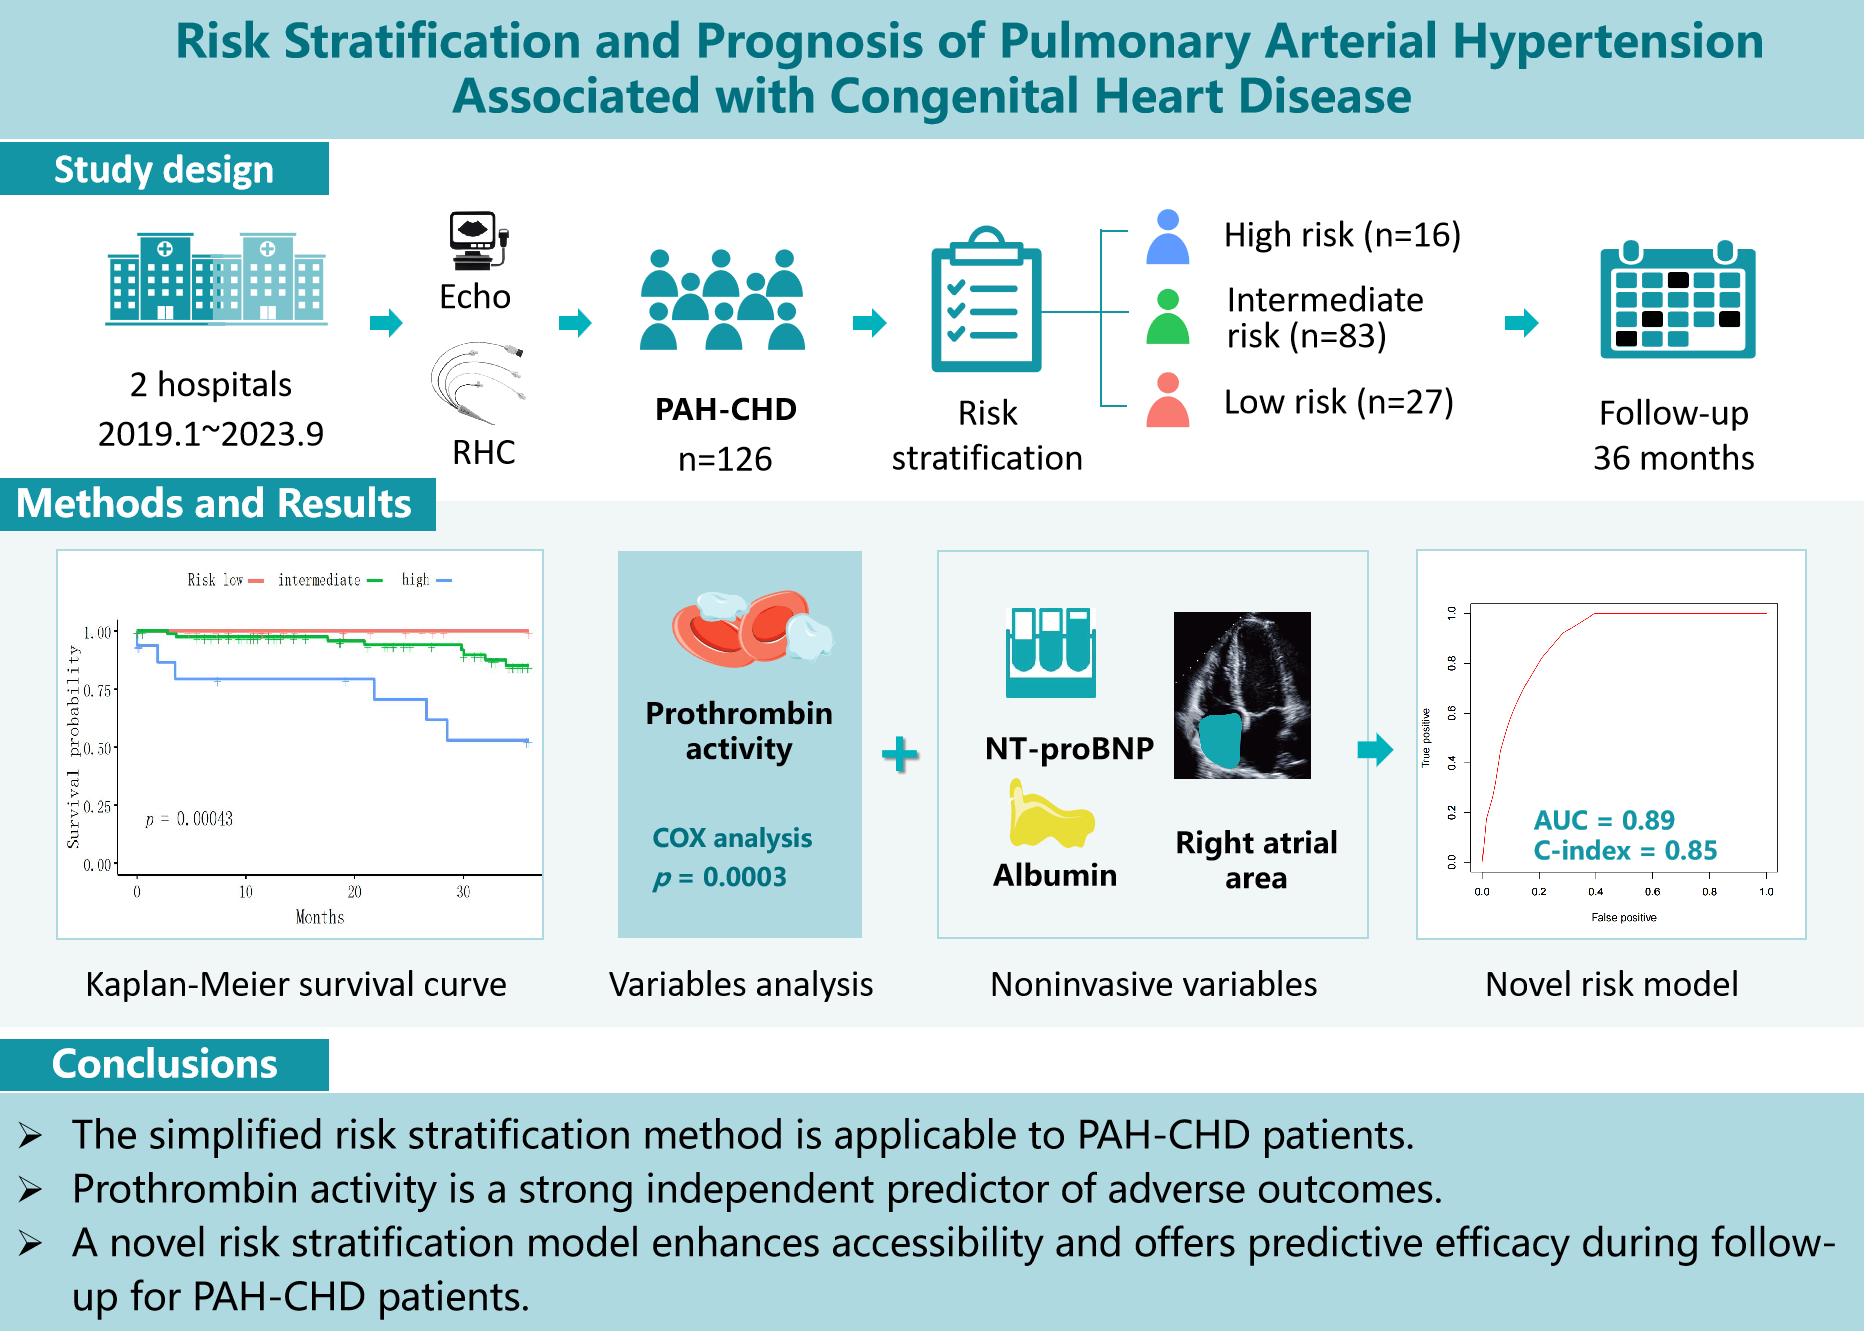 Risk Stratification and Prognosis of Pulmonary Arterial Hypertension Associated with Congenital Heart Disease